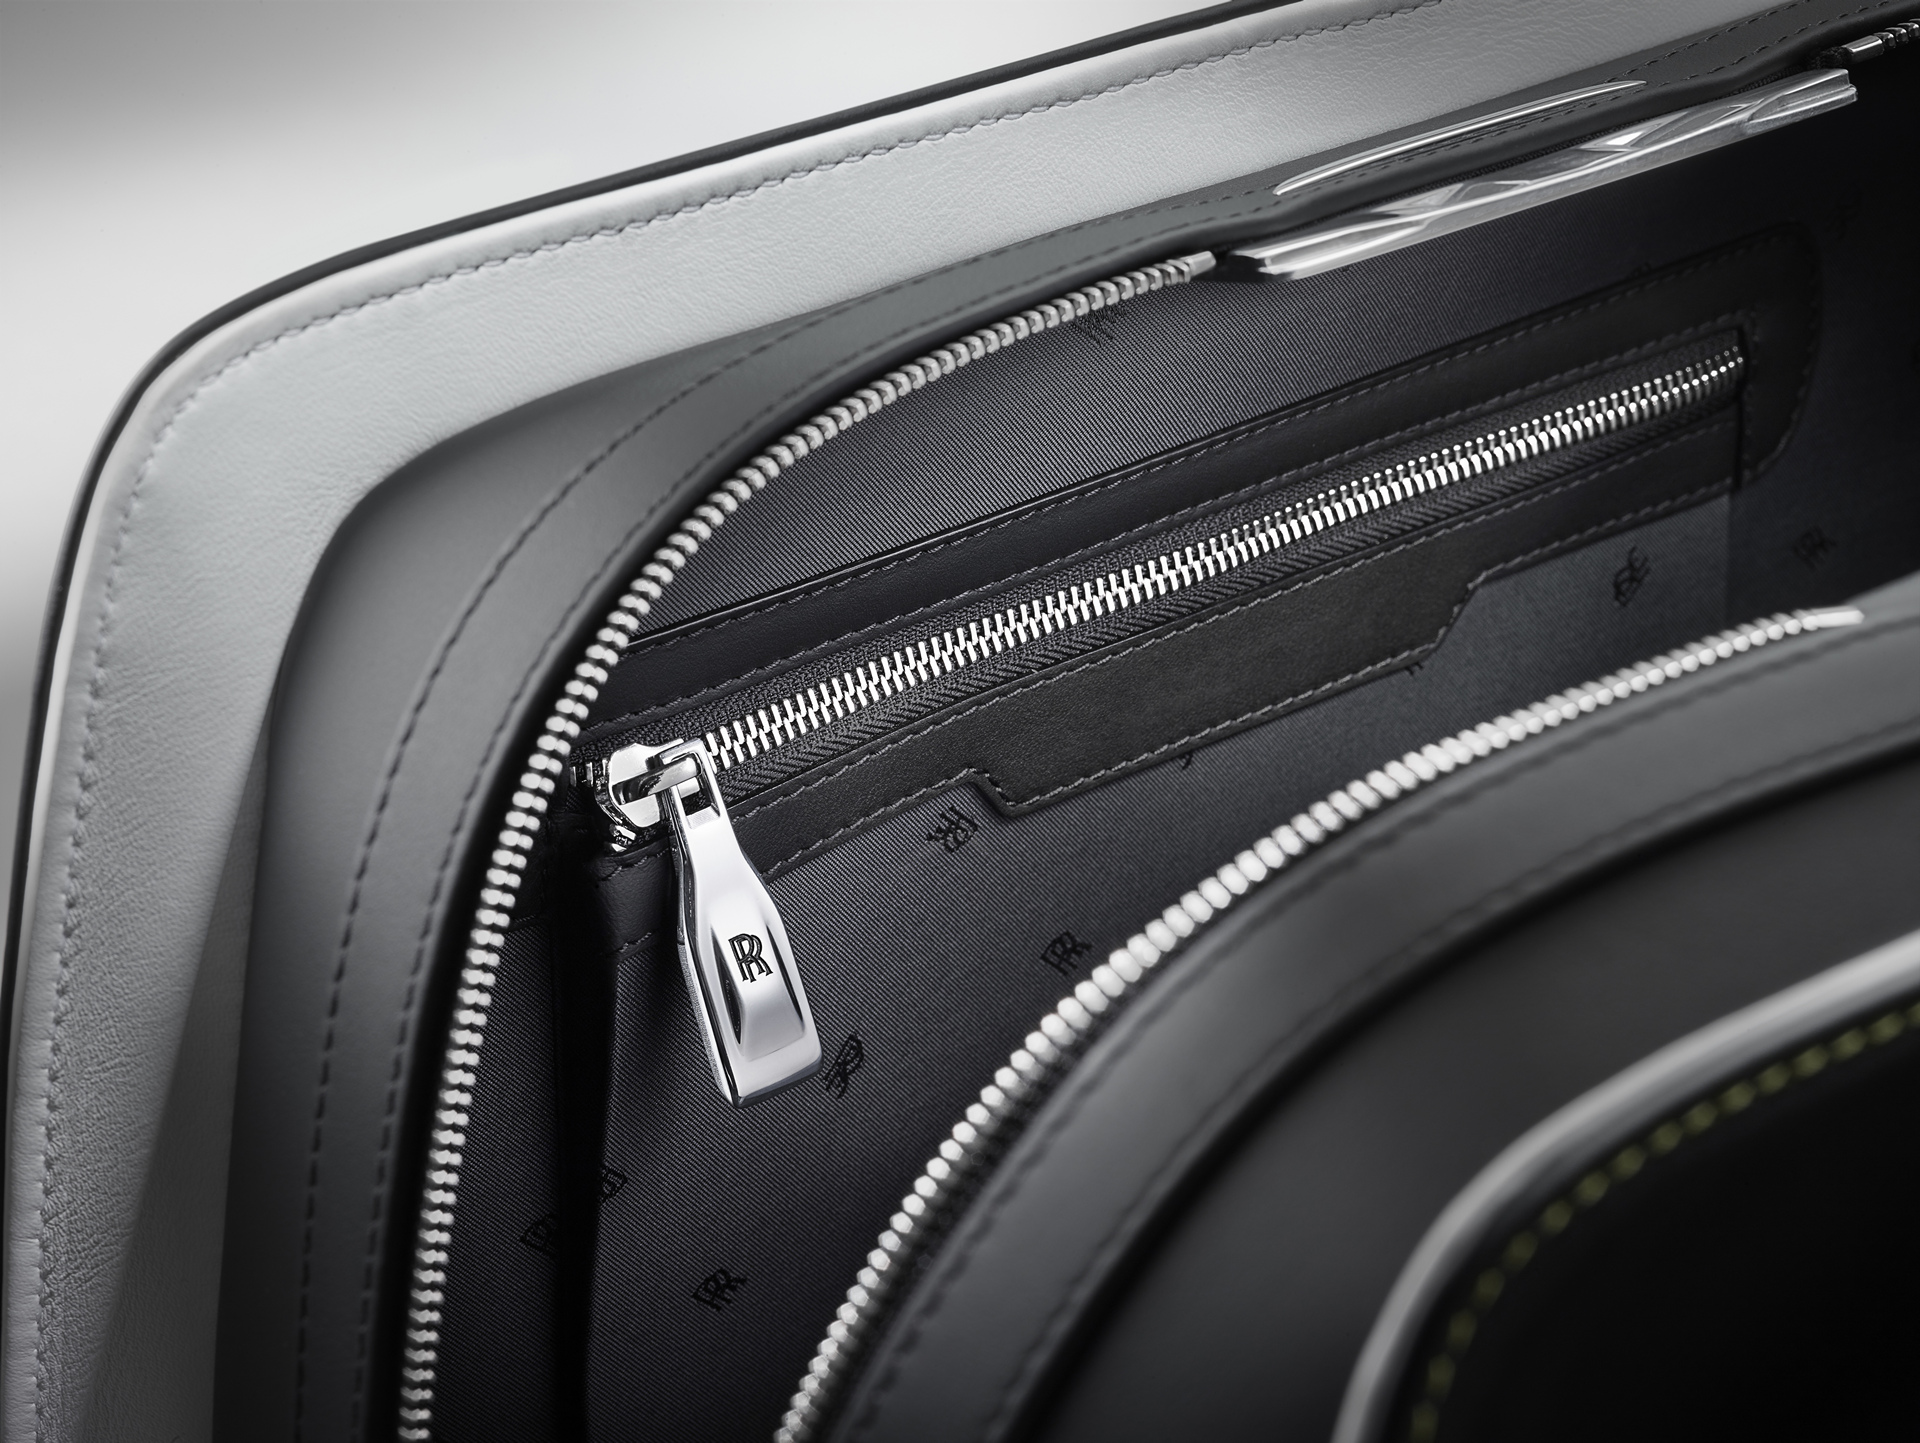 Wraith Luggage Collection Demonstrates the Art of True Luxury Conveyance © BMW AG